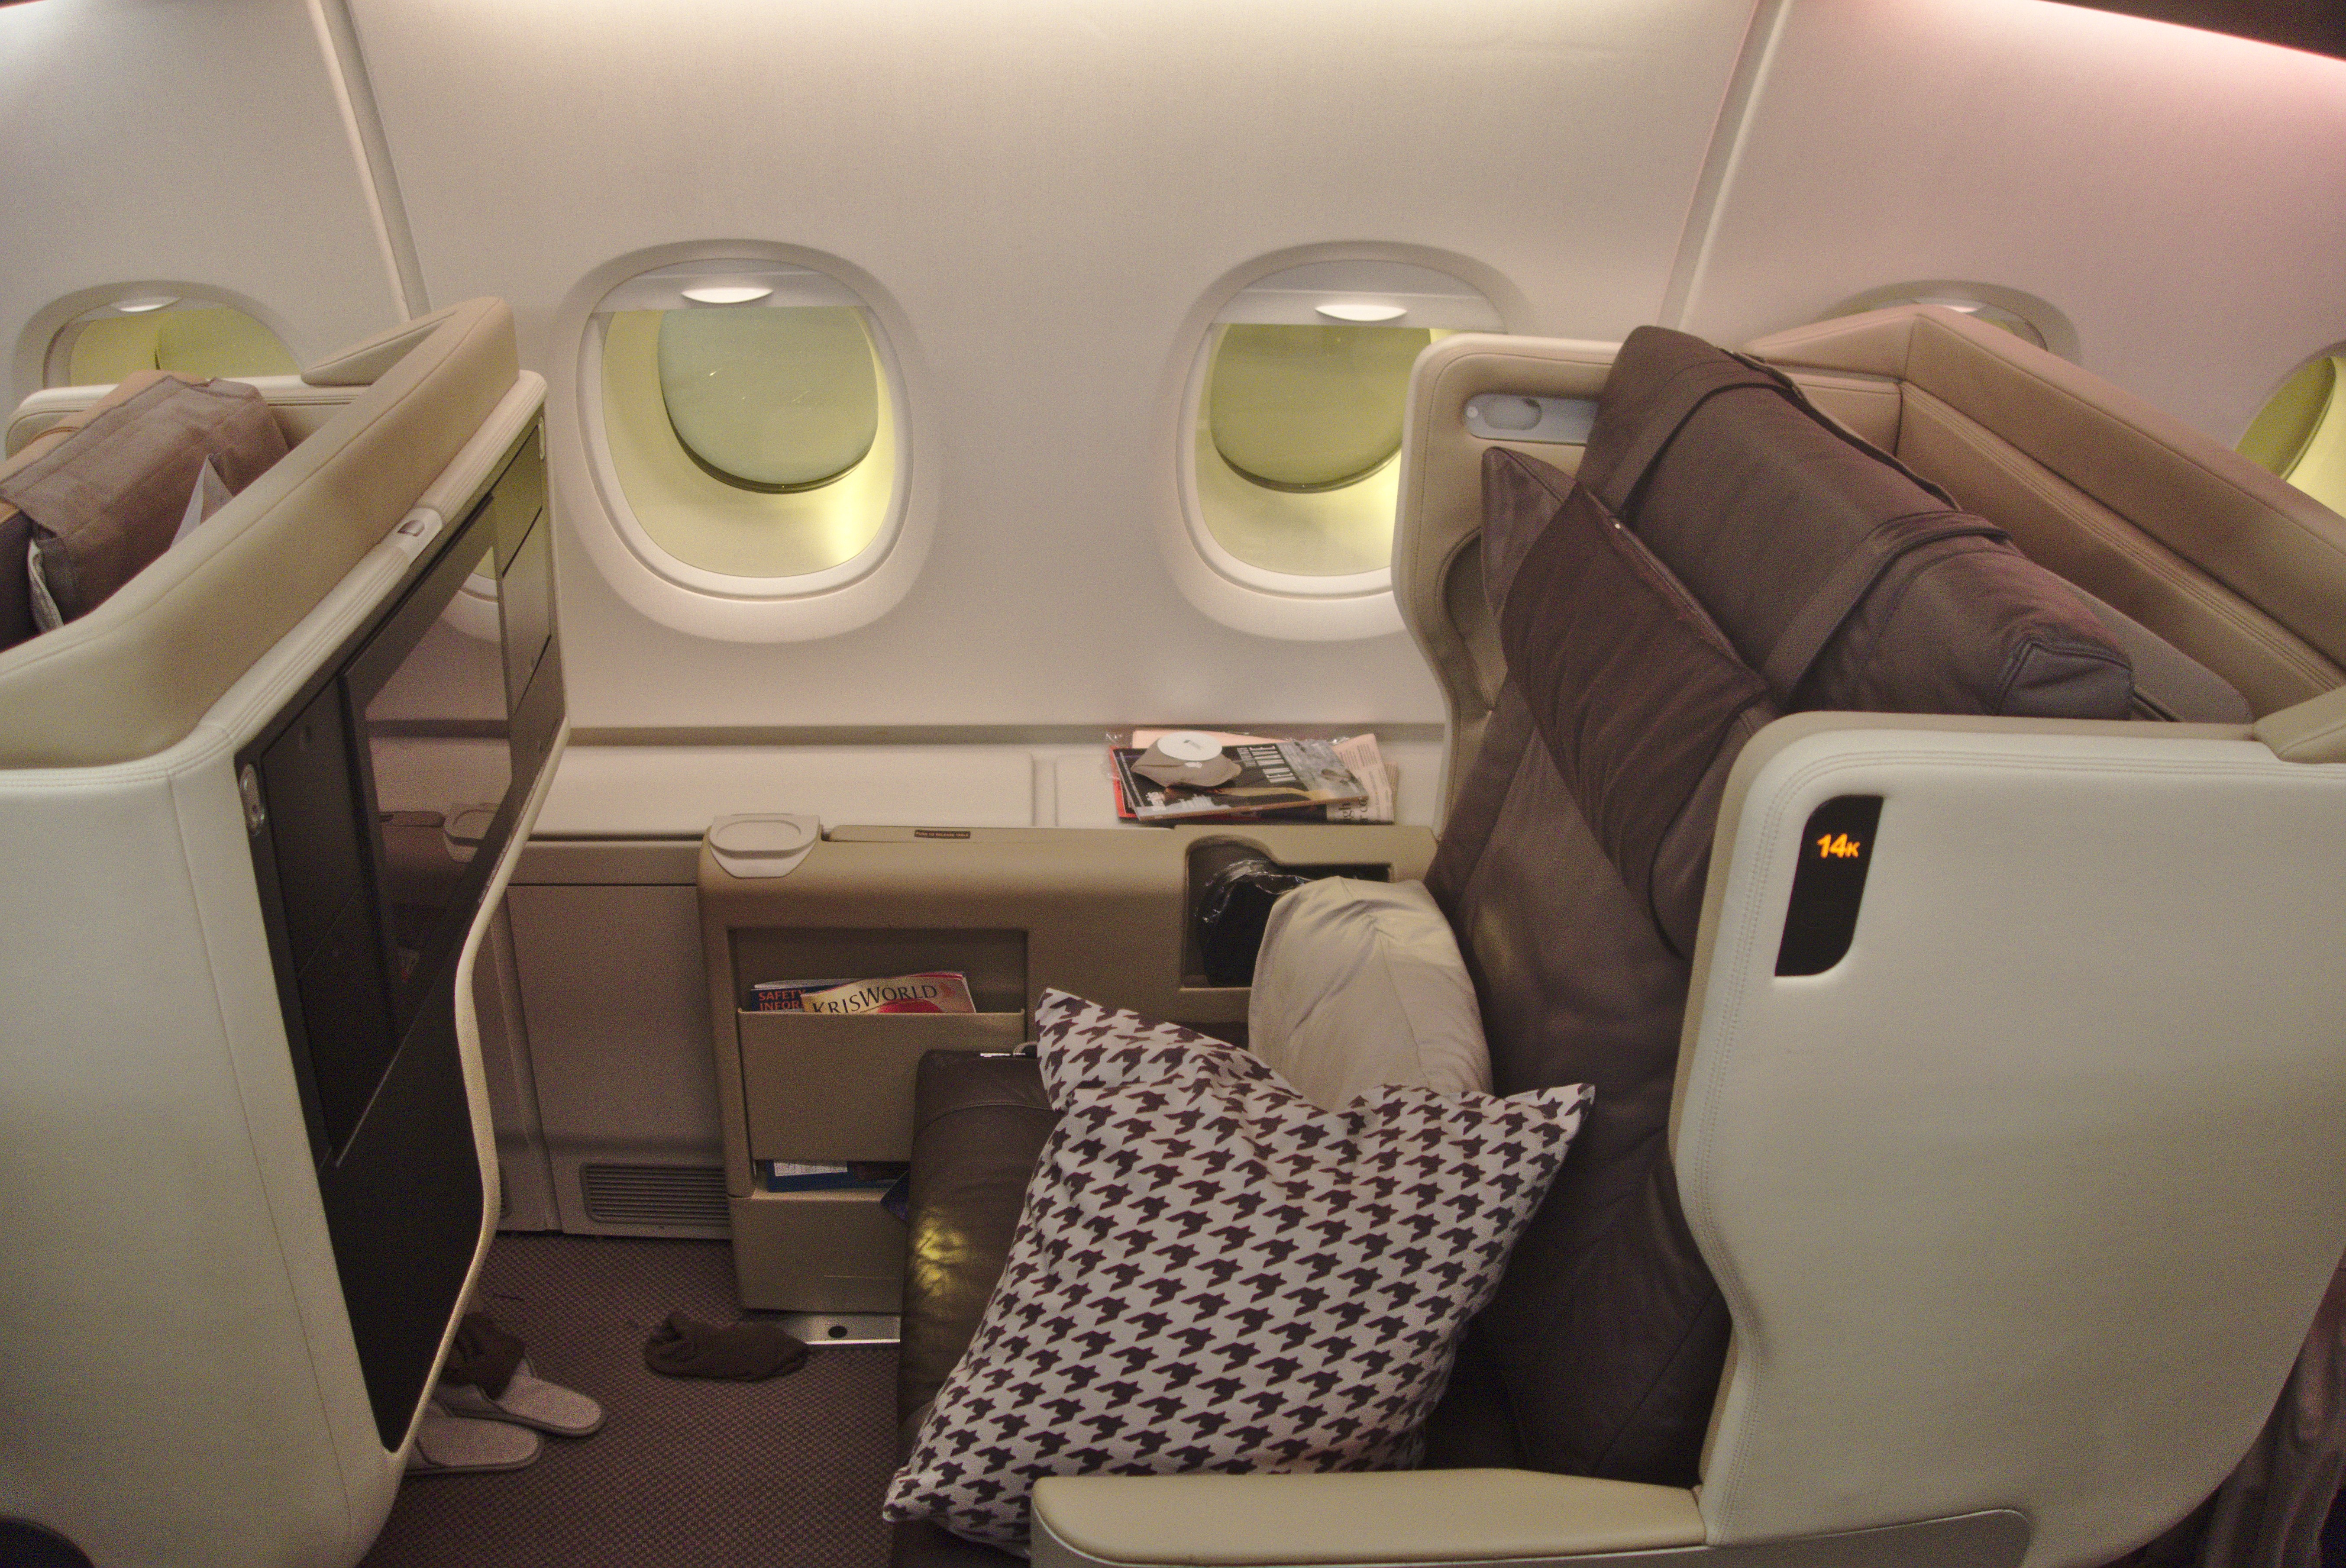 Singapore Airlines A380 Business Class